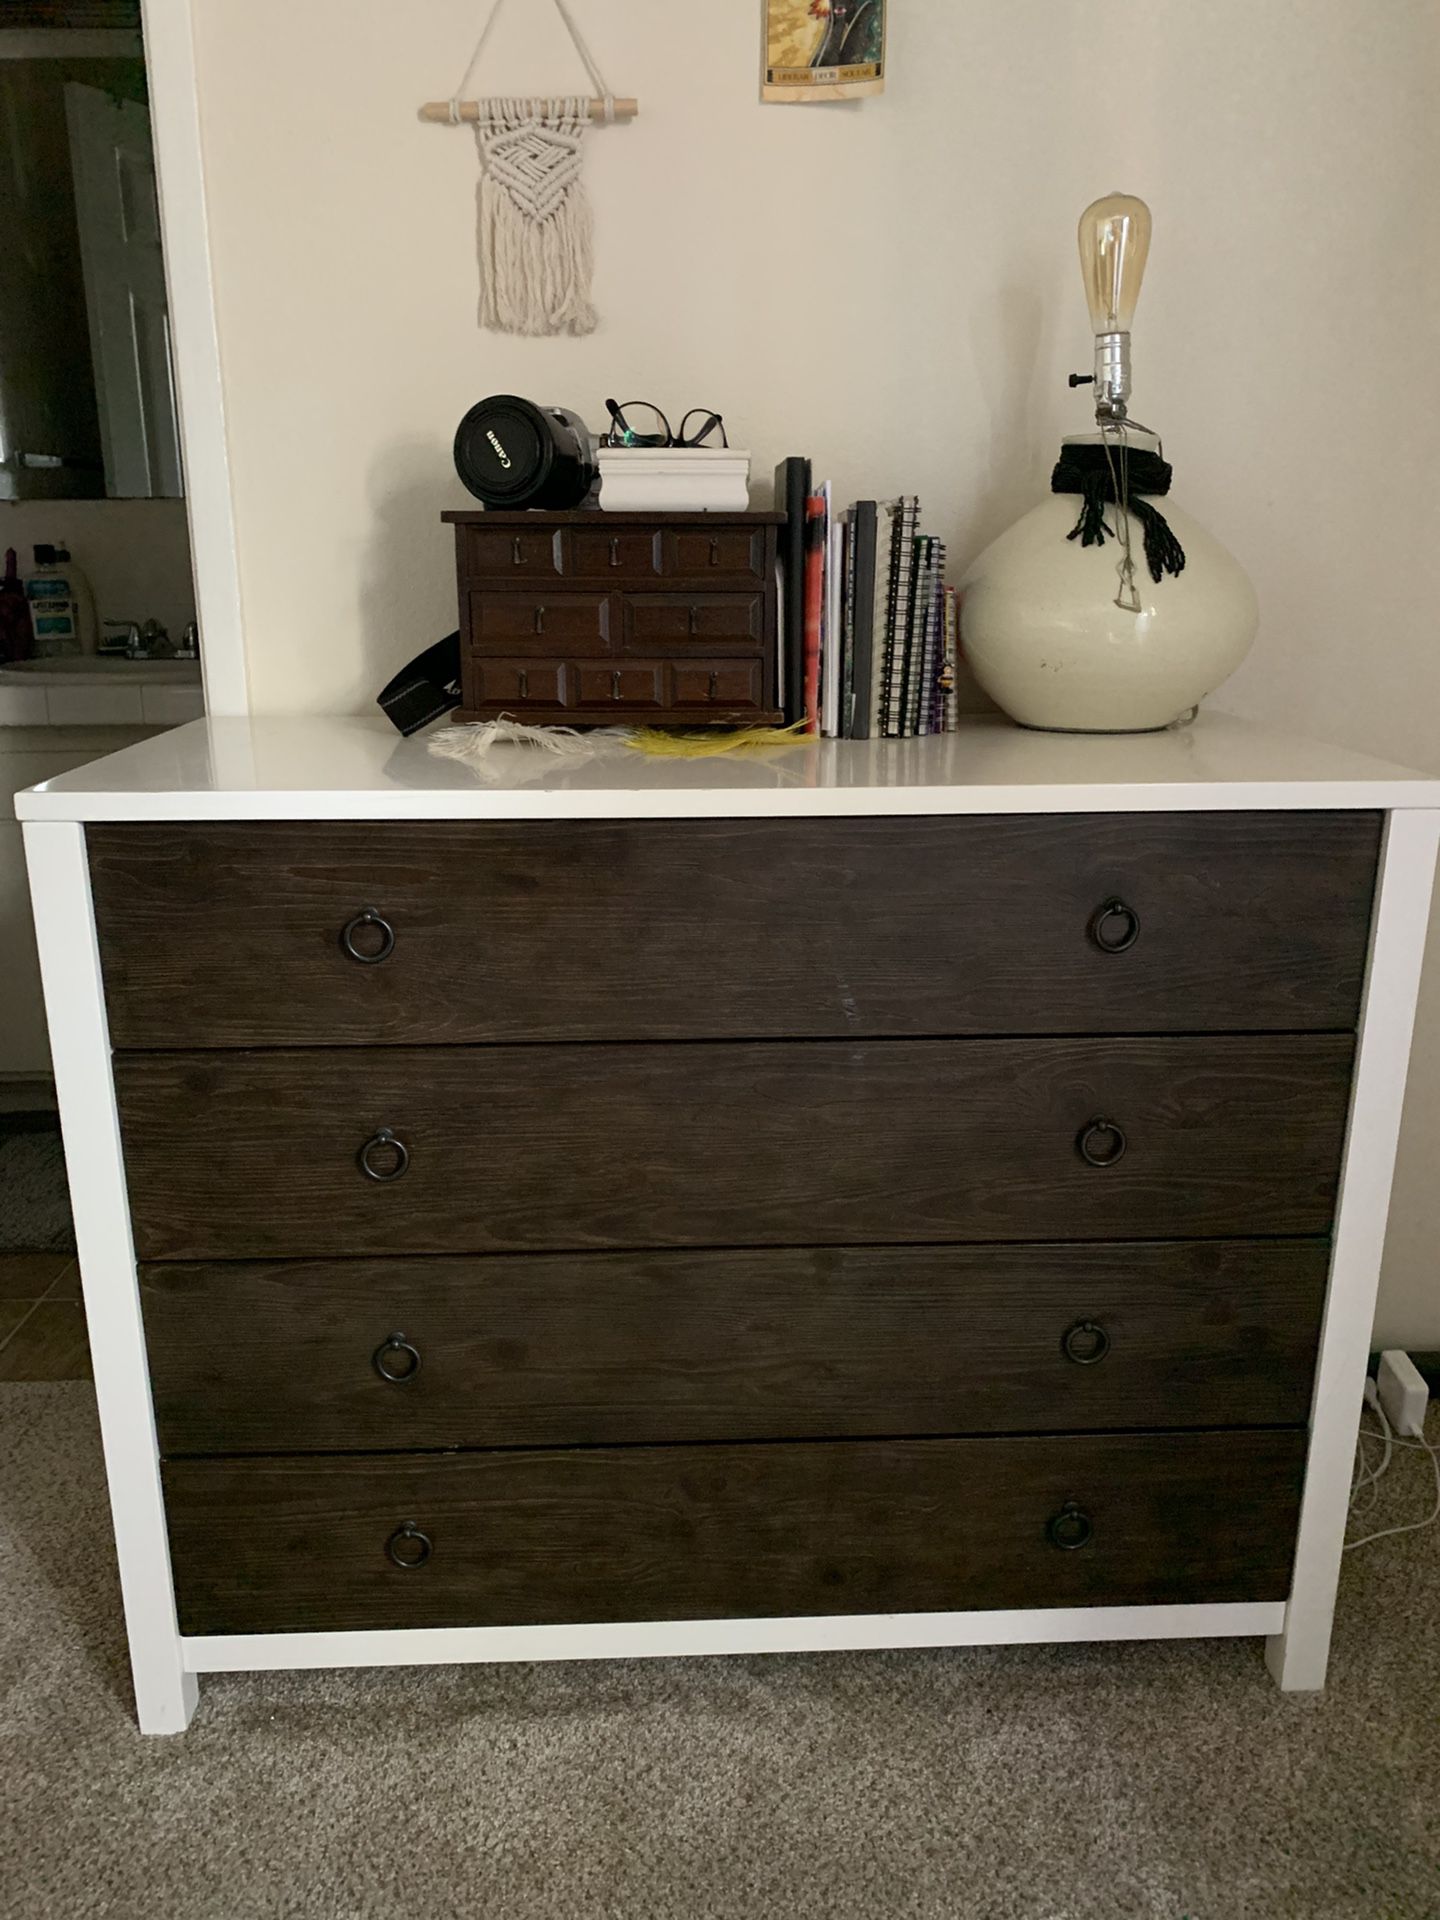 Pottery Barn Industrial Farmhouse Solid Wood Dresser For Sale In San Diego Ca Offerup